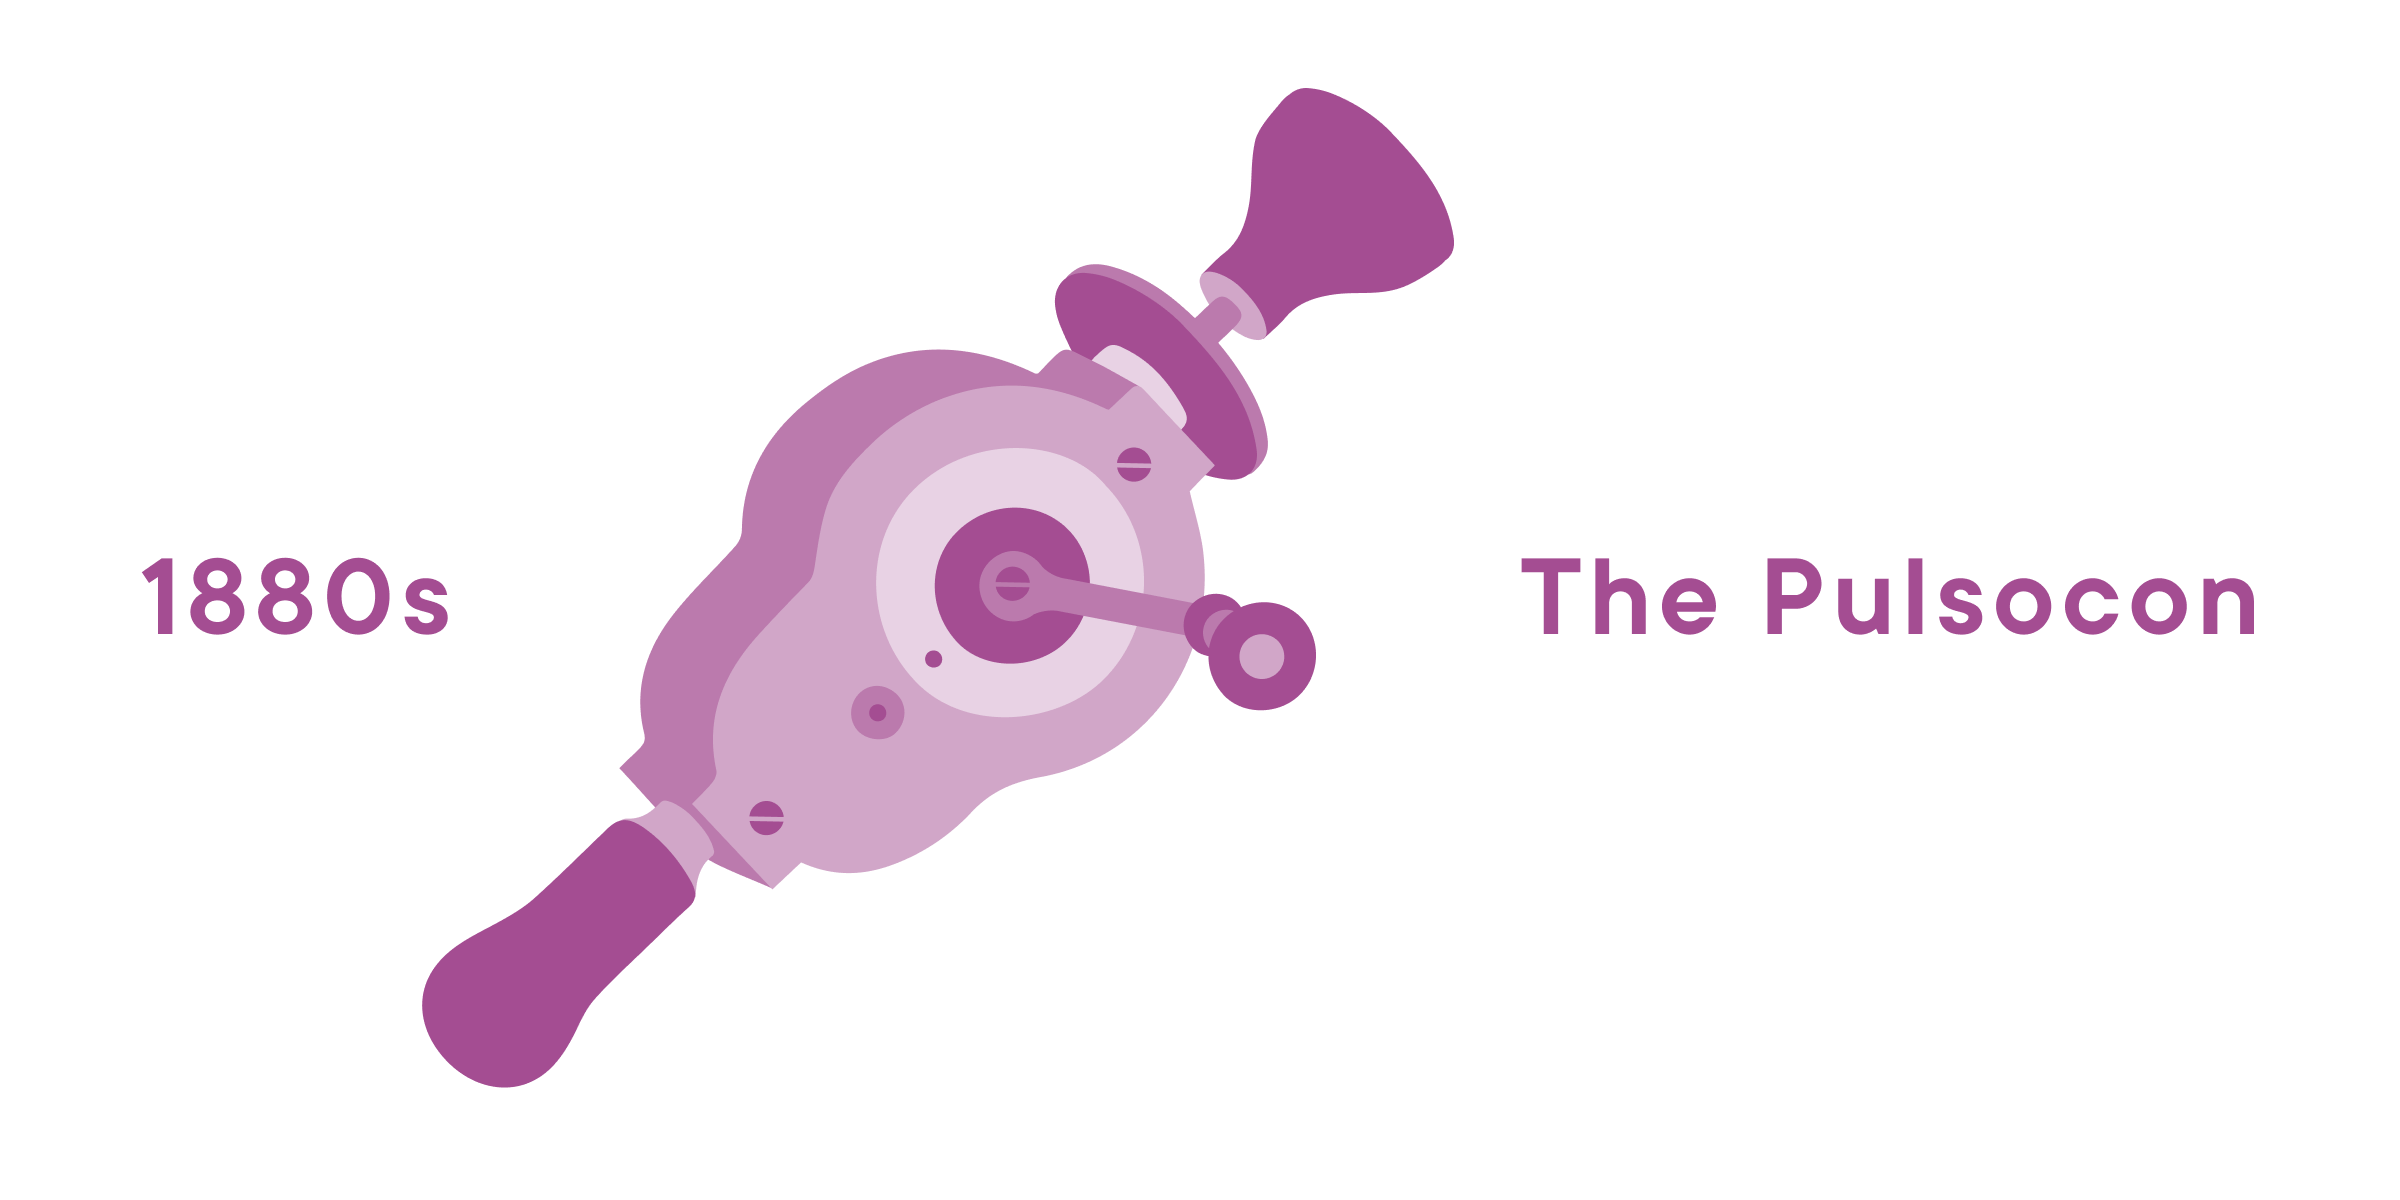 A history of vibrators from ancient times to the present